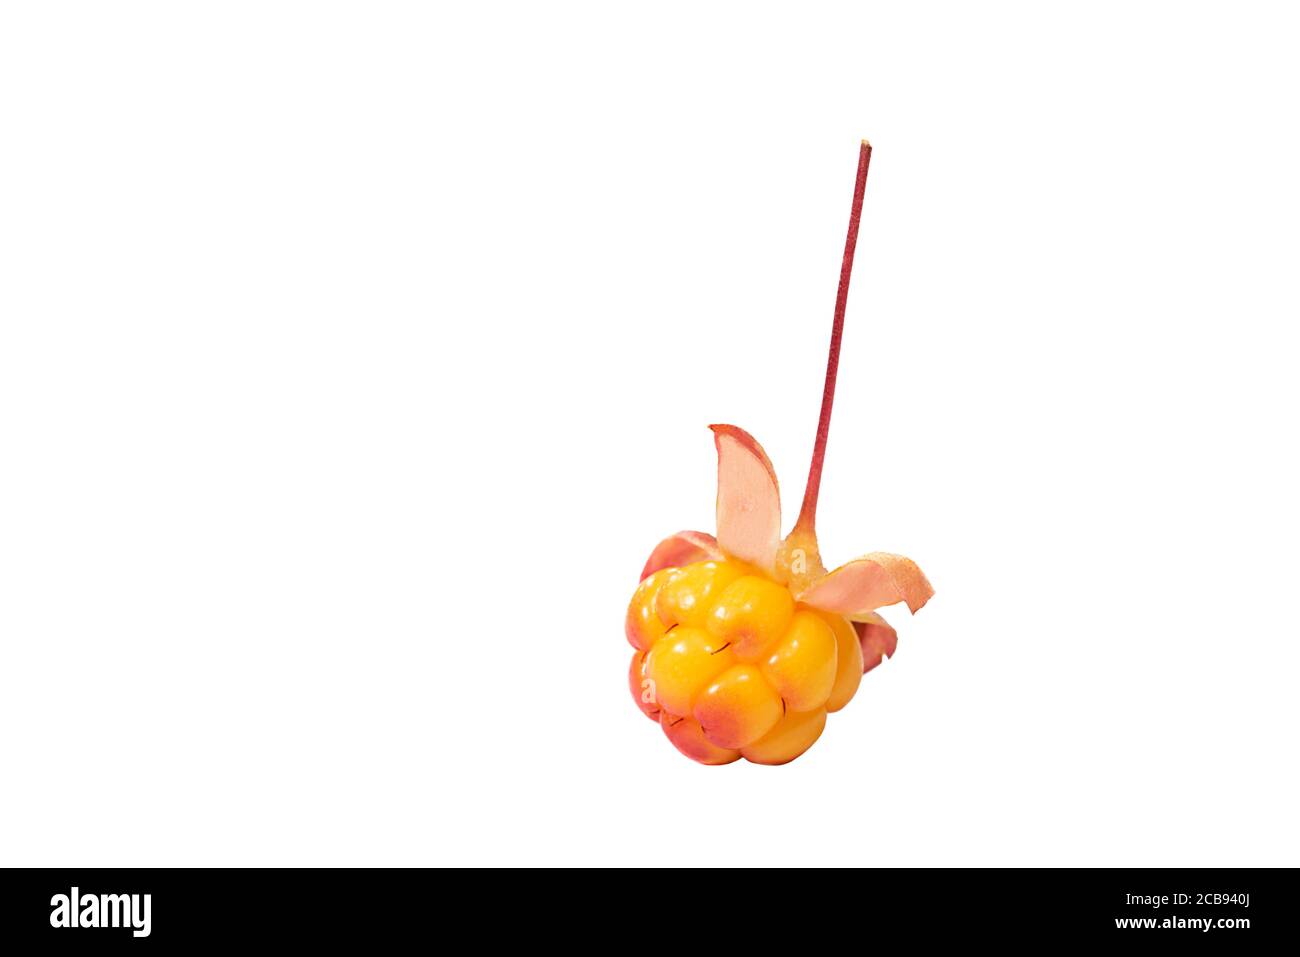 Ripe yellow cloudberry isolated on a white background Stock Photo